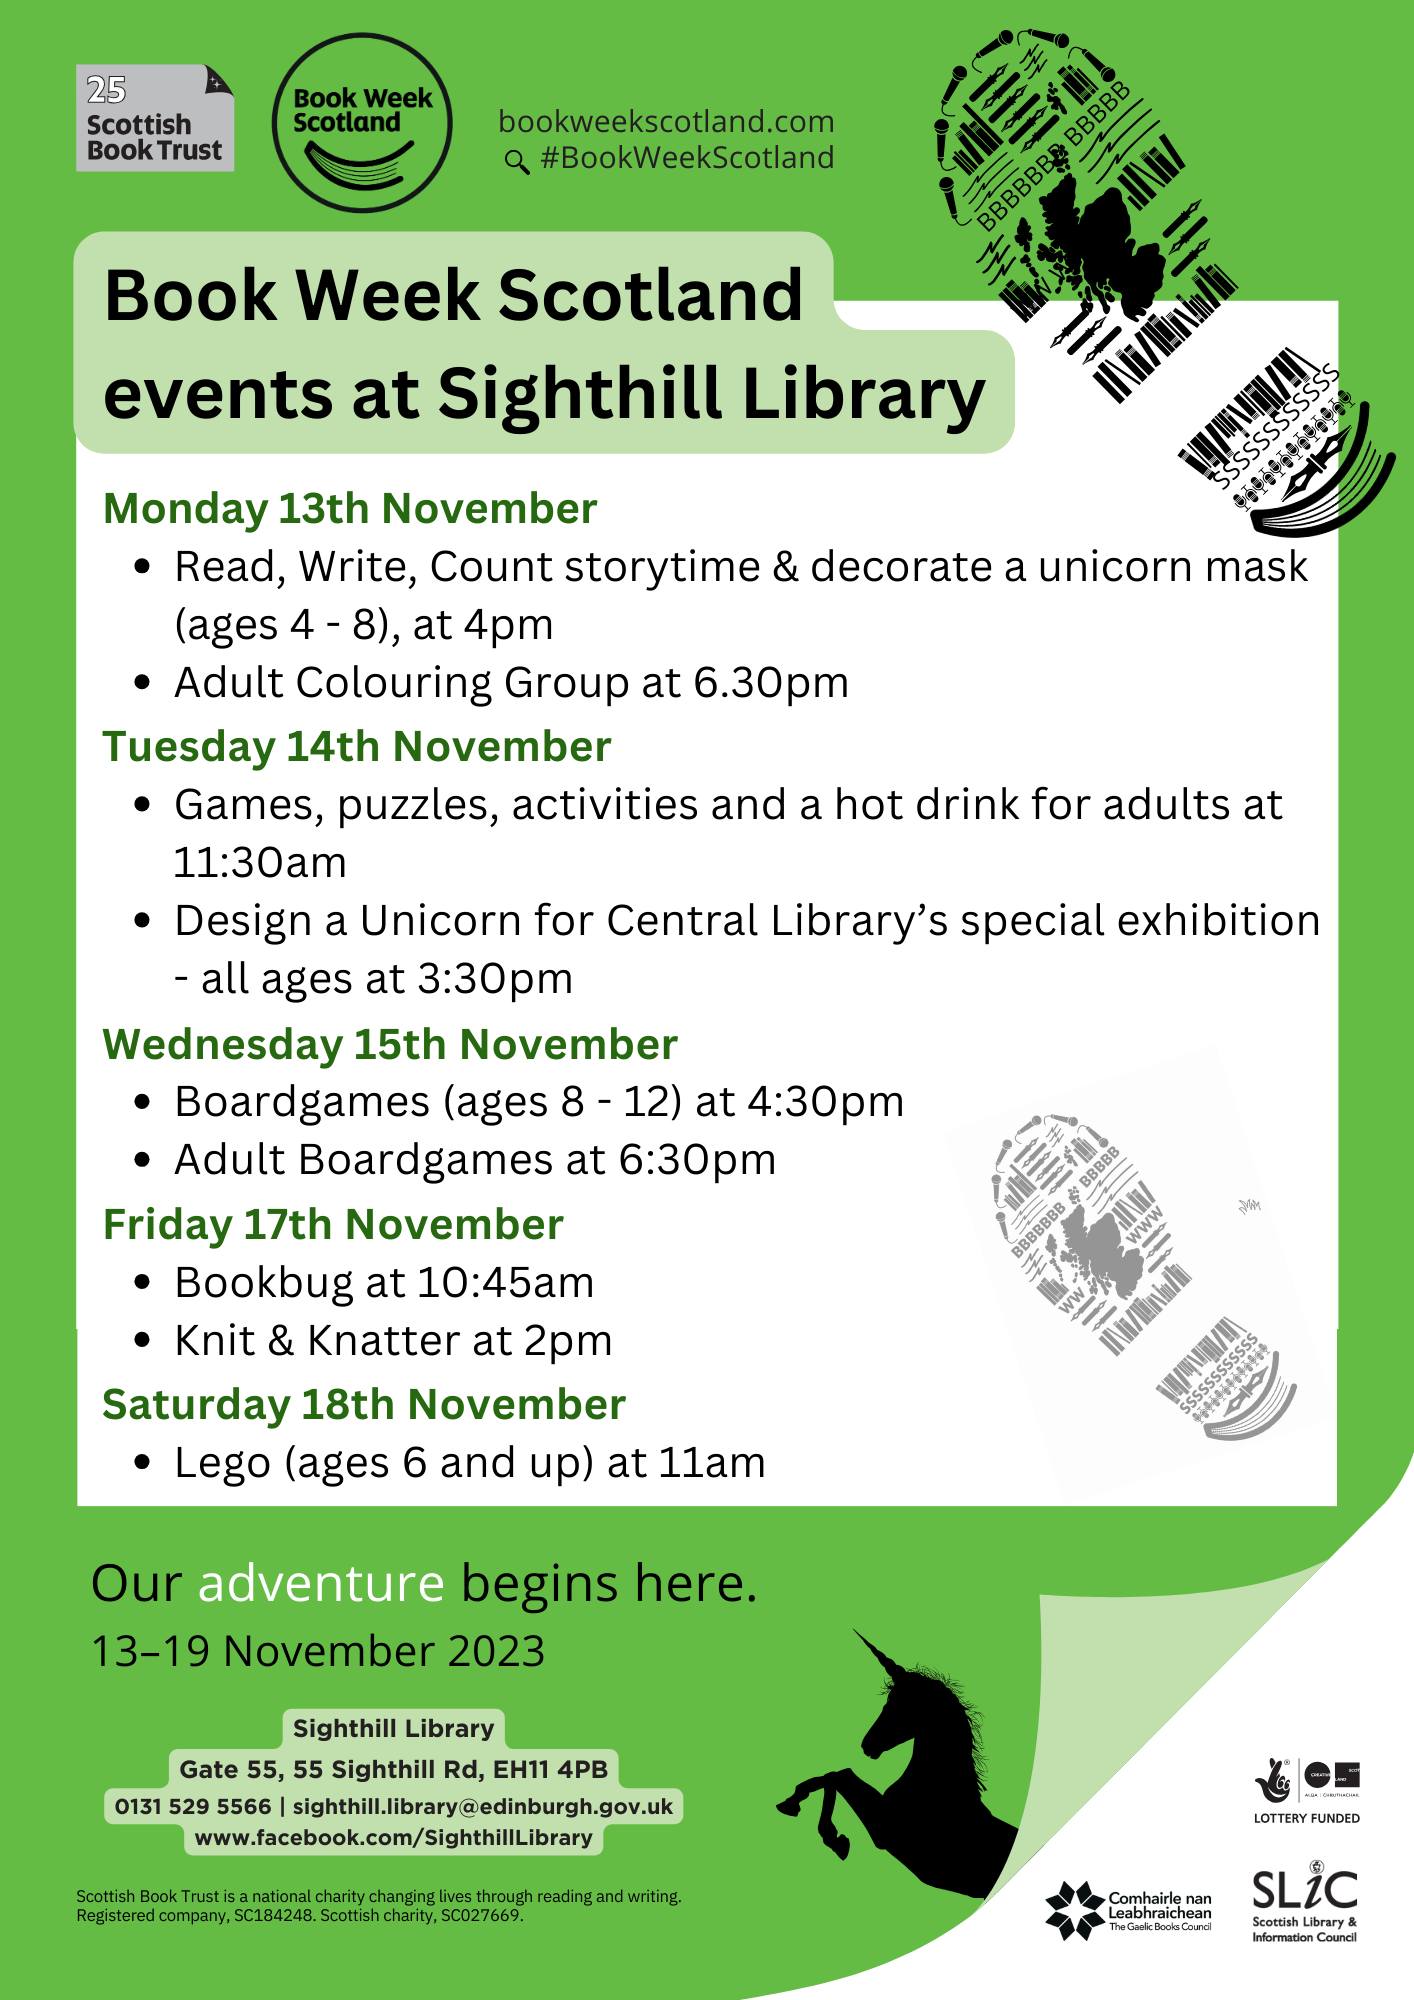 Sighthill Library Book Week Scotland